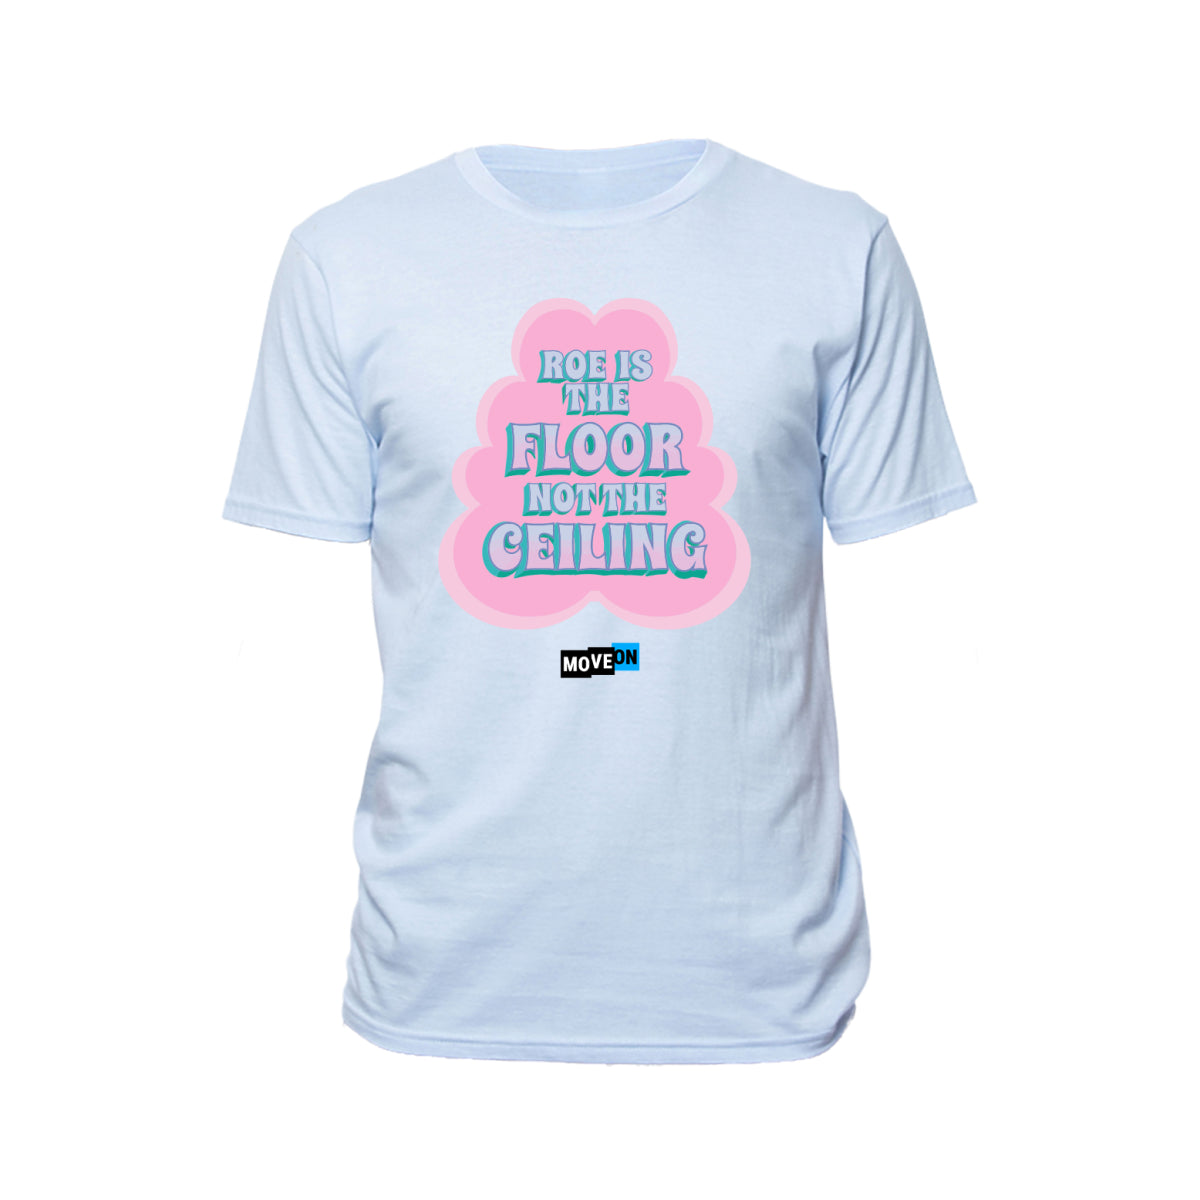 "Roe is the Floor, Not the Ceiling" Unisex Cotton T-Shirt